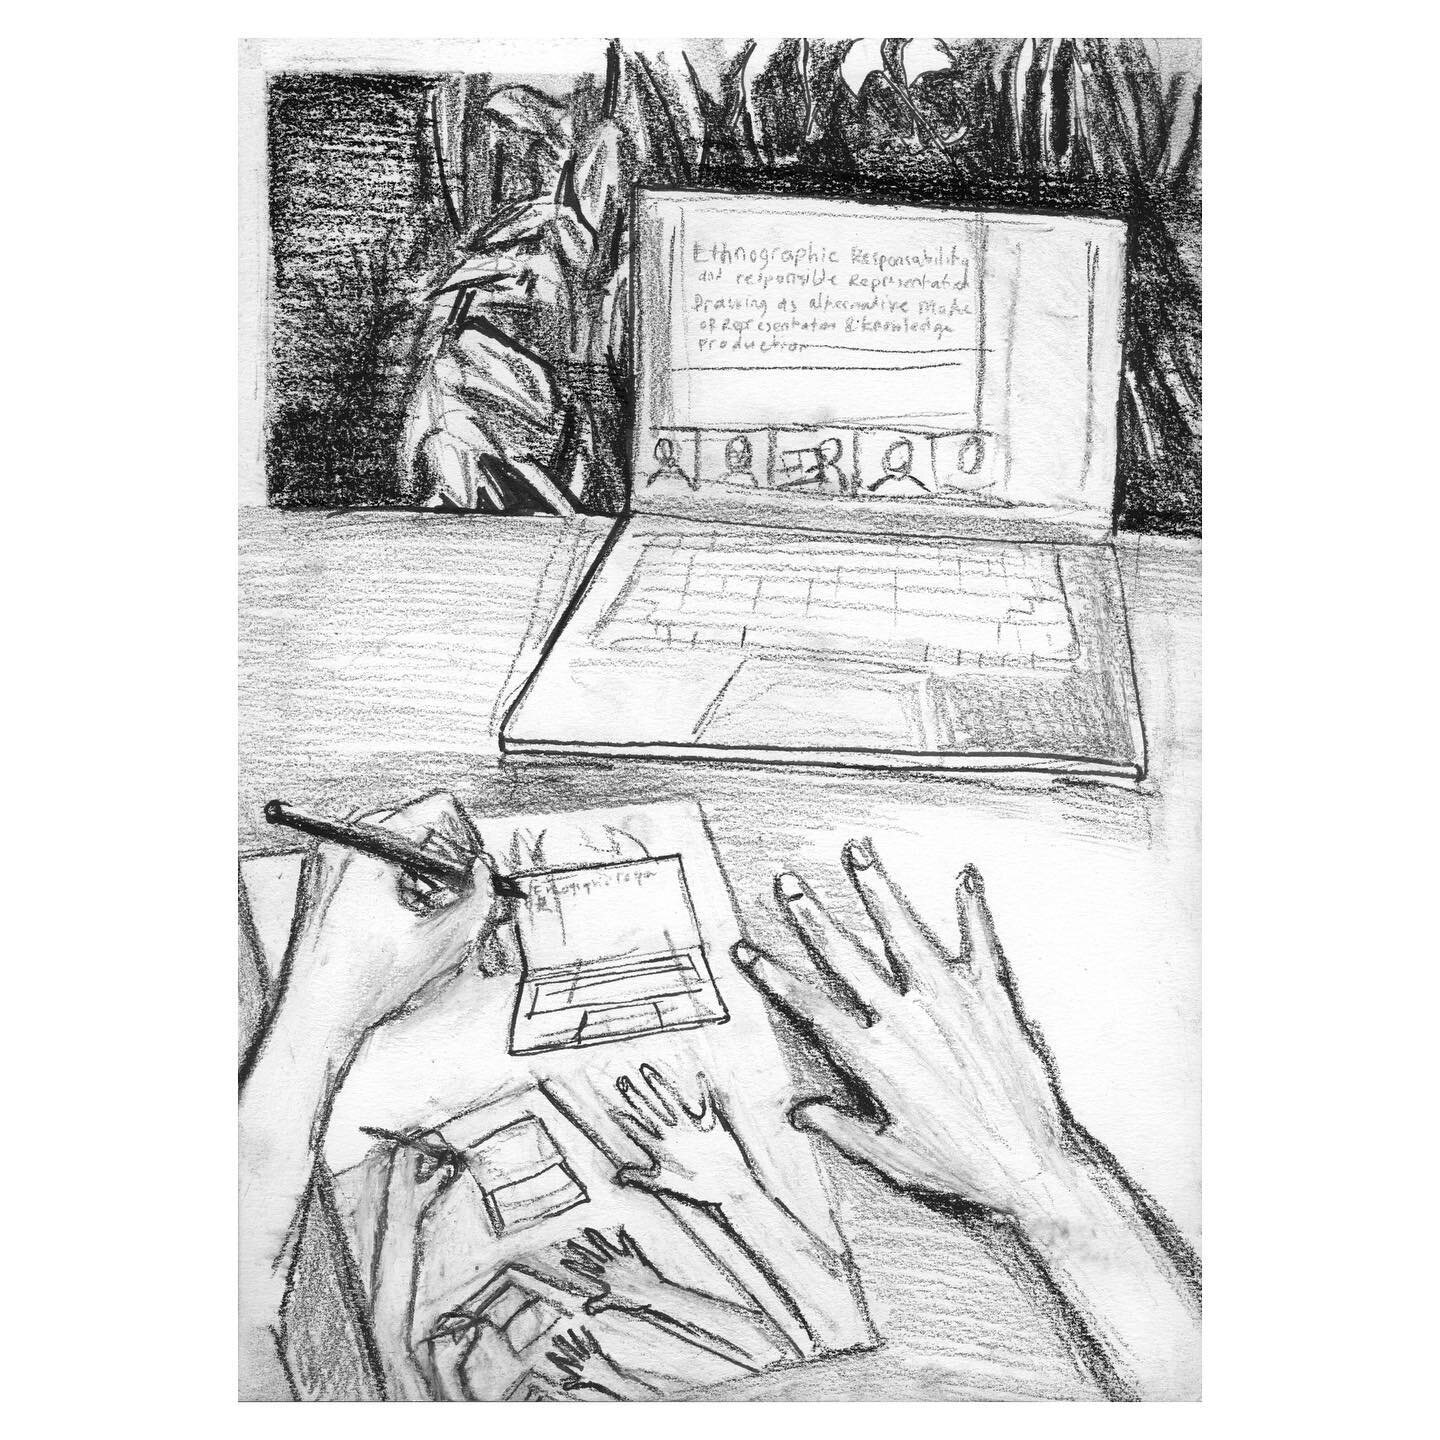 &ldquo;An anthropologist drawing anthropologists talking about drawing in anthropology&rdquo;
// charcoal on paper, 2021

#ASA2021 #conference #drawing #socialscience #visualethnography #visualstorytelling #graphicanthropology #alternativeethnography